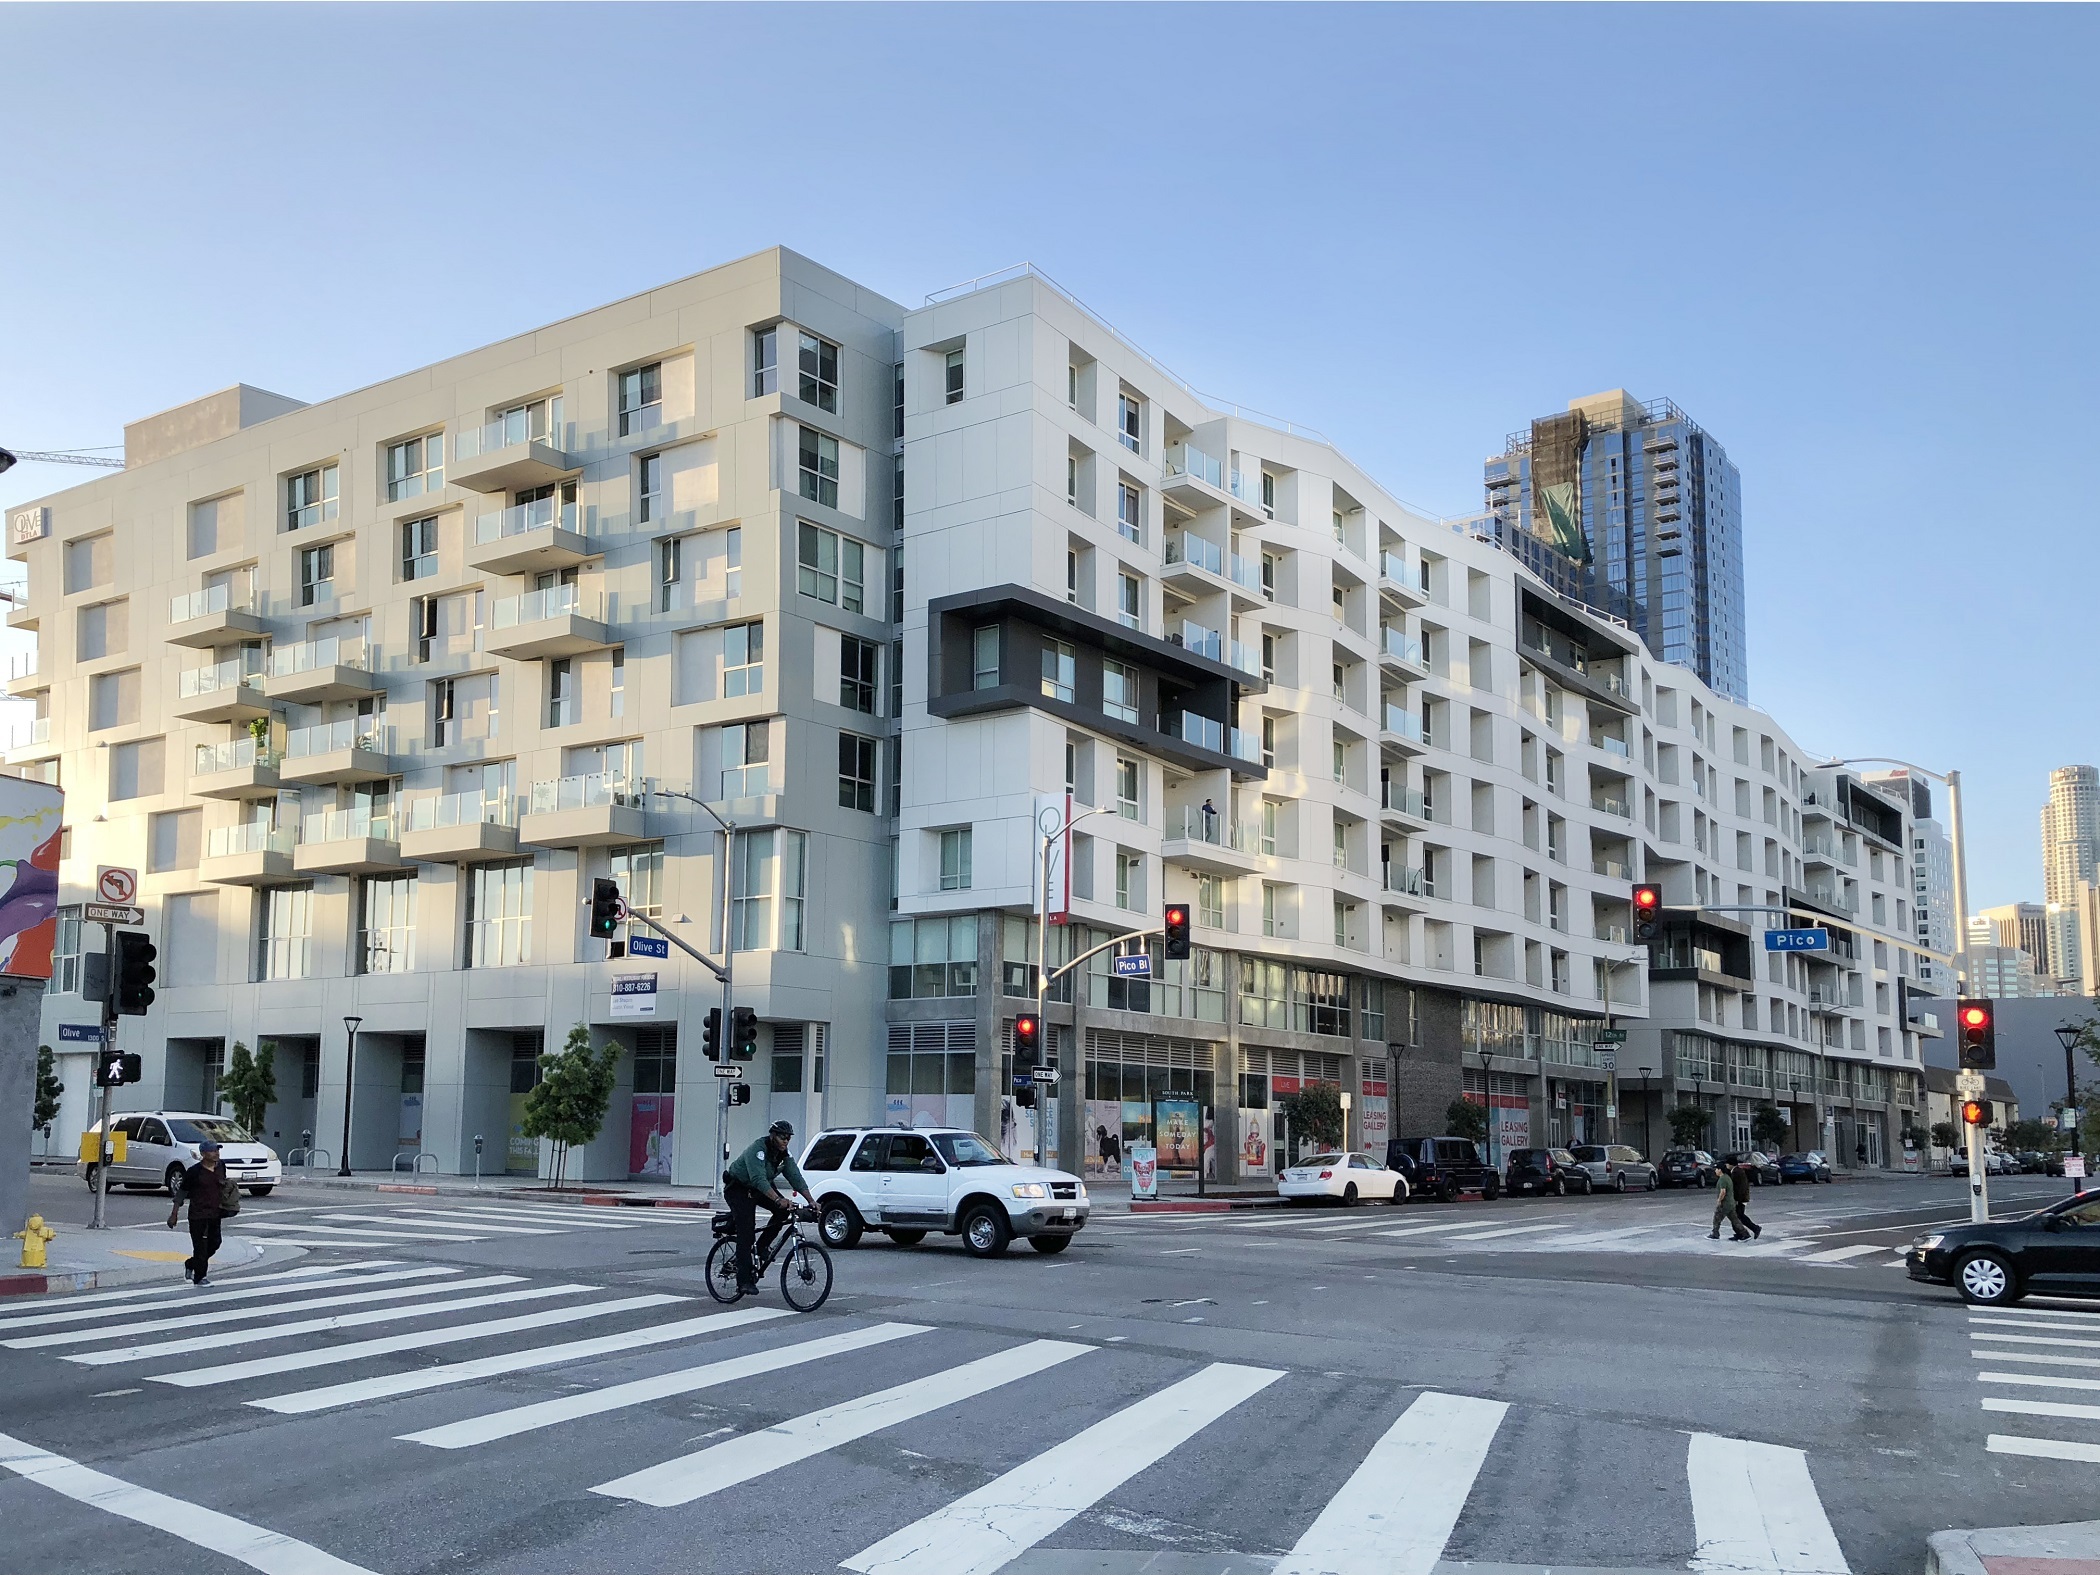 Los Angeles city council has passed more restrictions on residential landlords in recent weeks in an effort to protect tenants, councilmembers say. (CoStar)